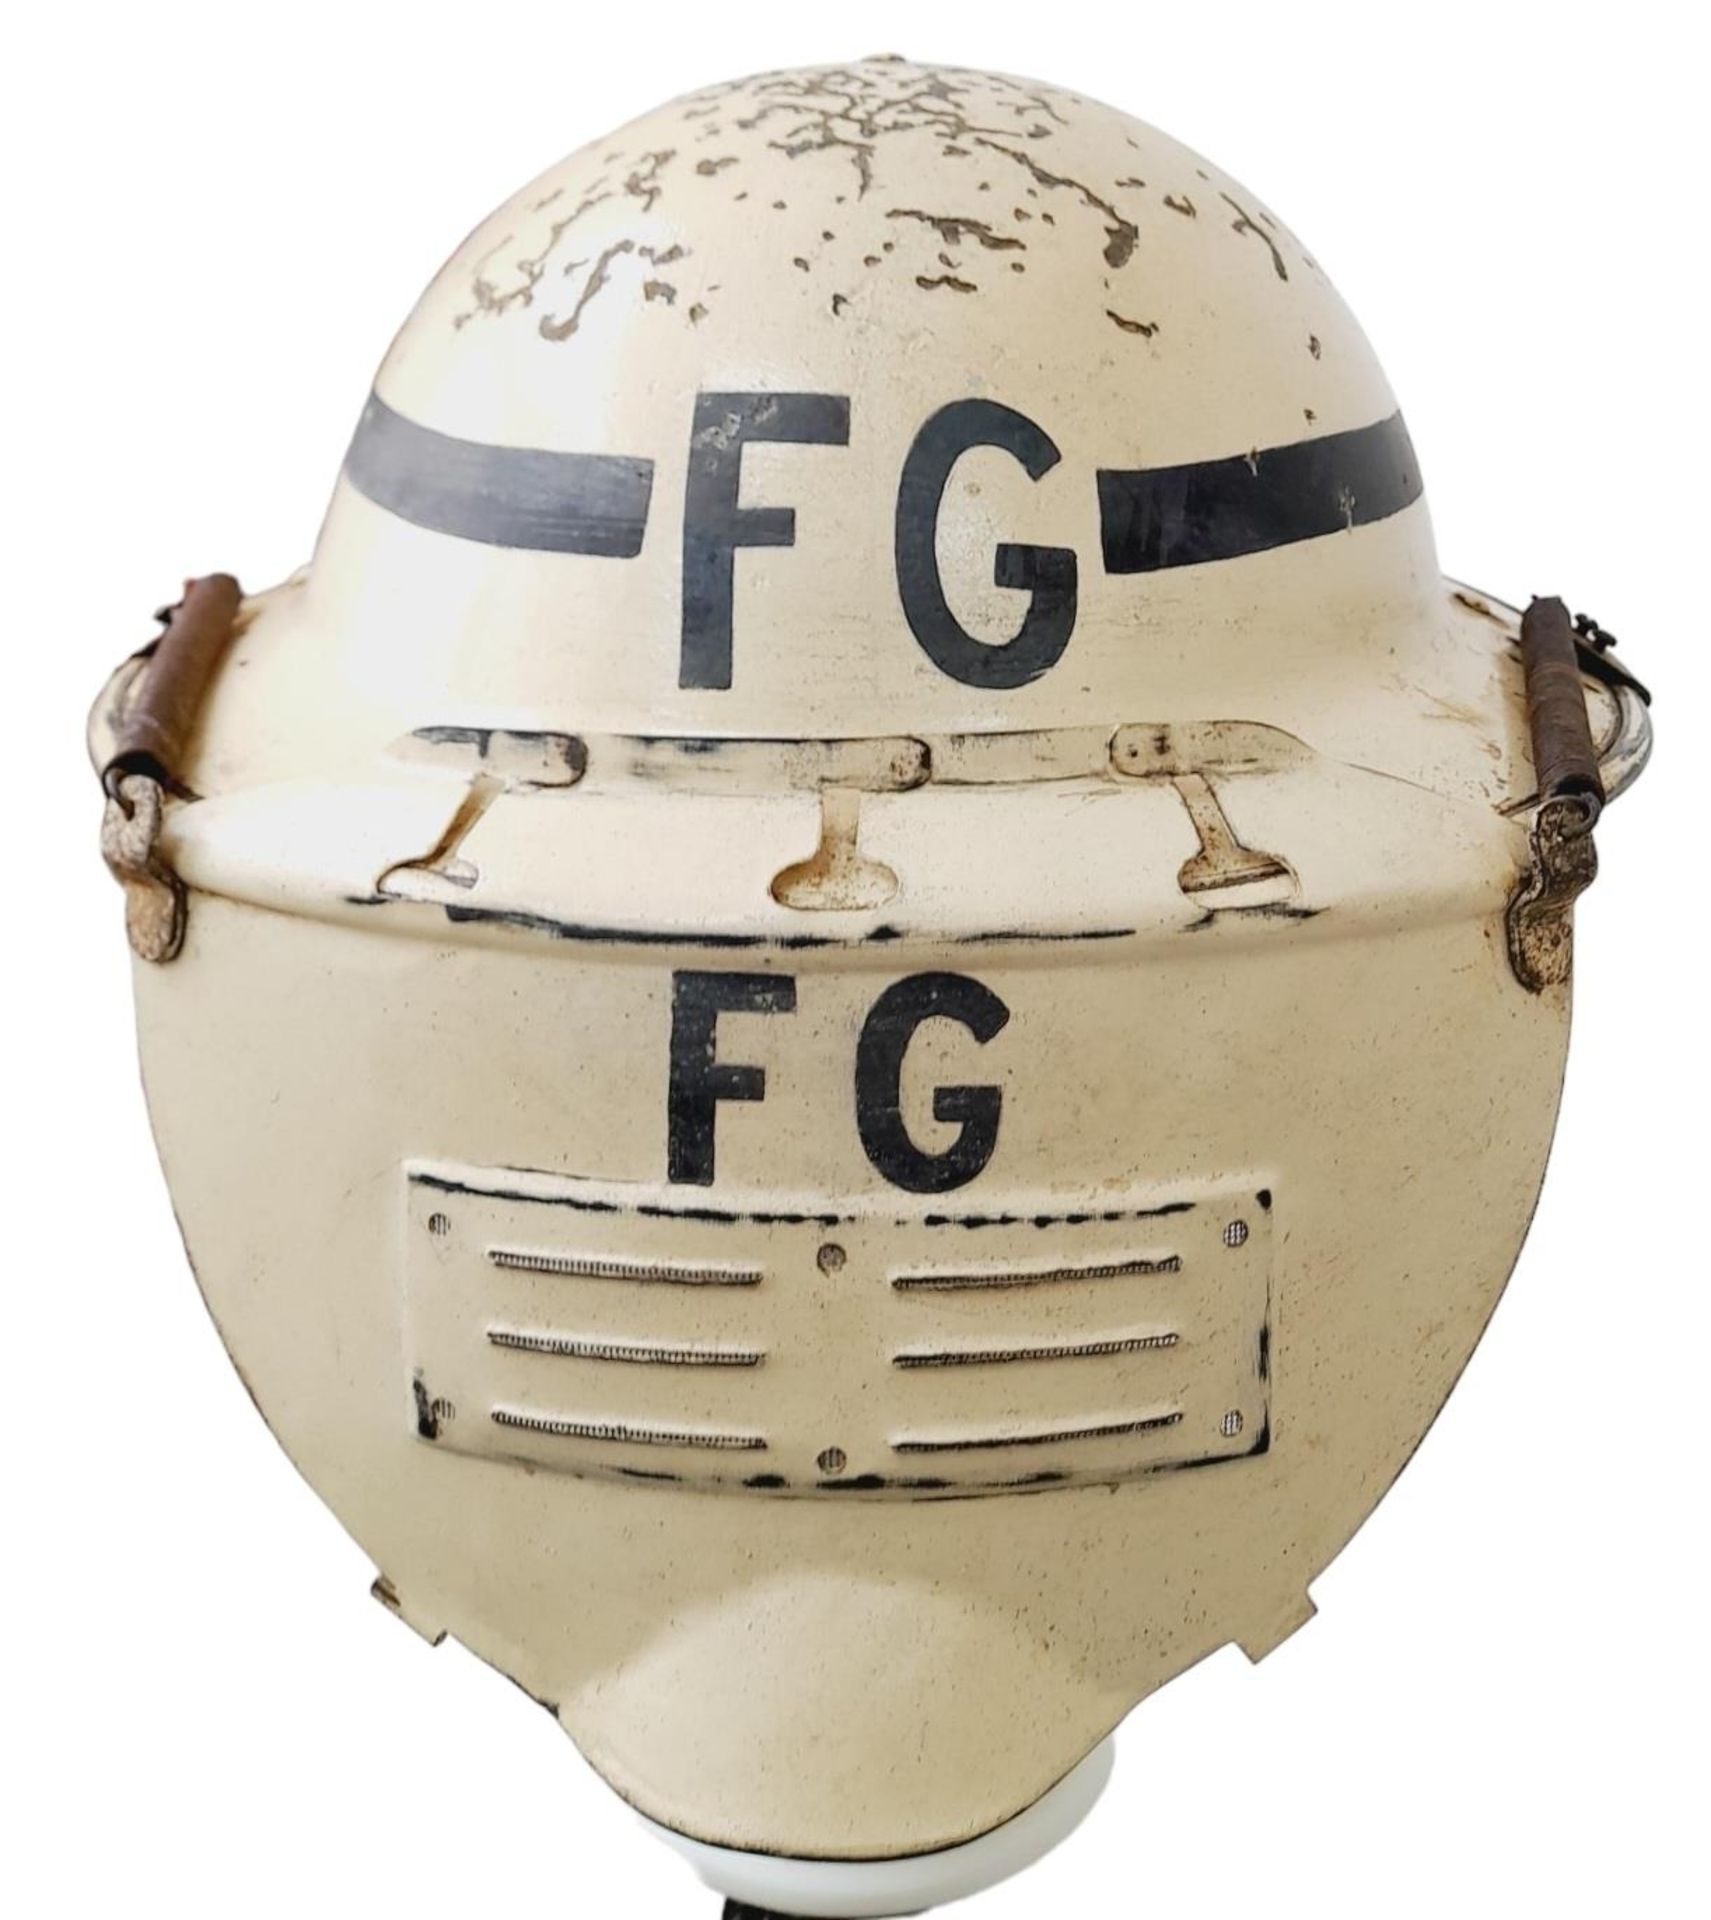 WW2 British Home Front Head Fire Guard’s Helmet and Visor. - Image 2 of 7